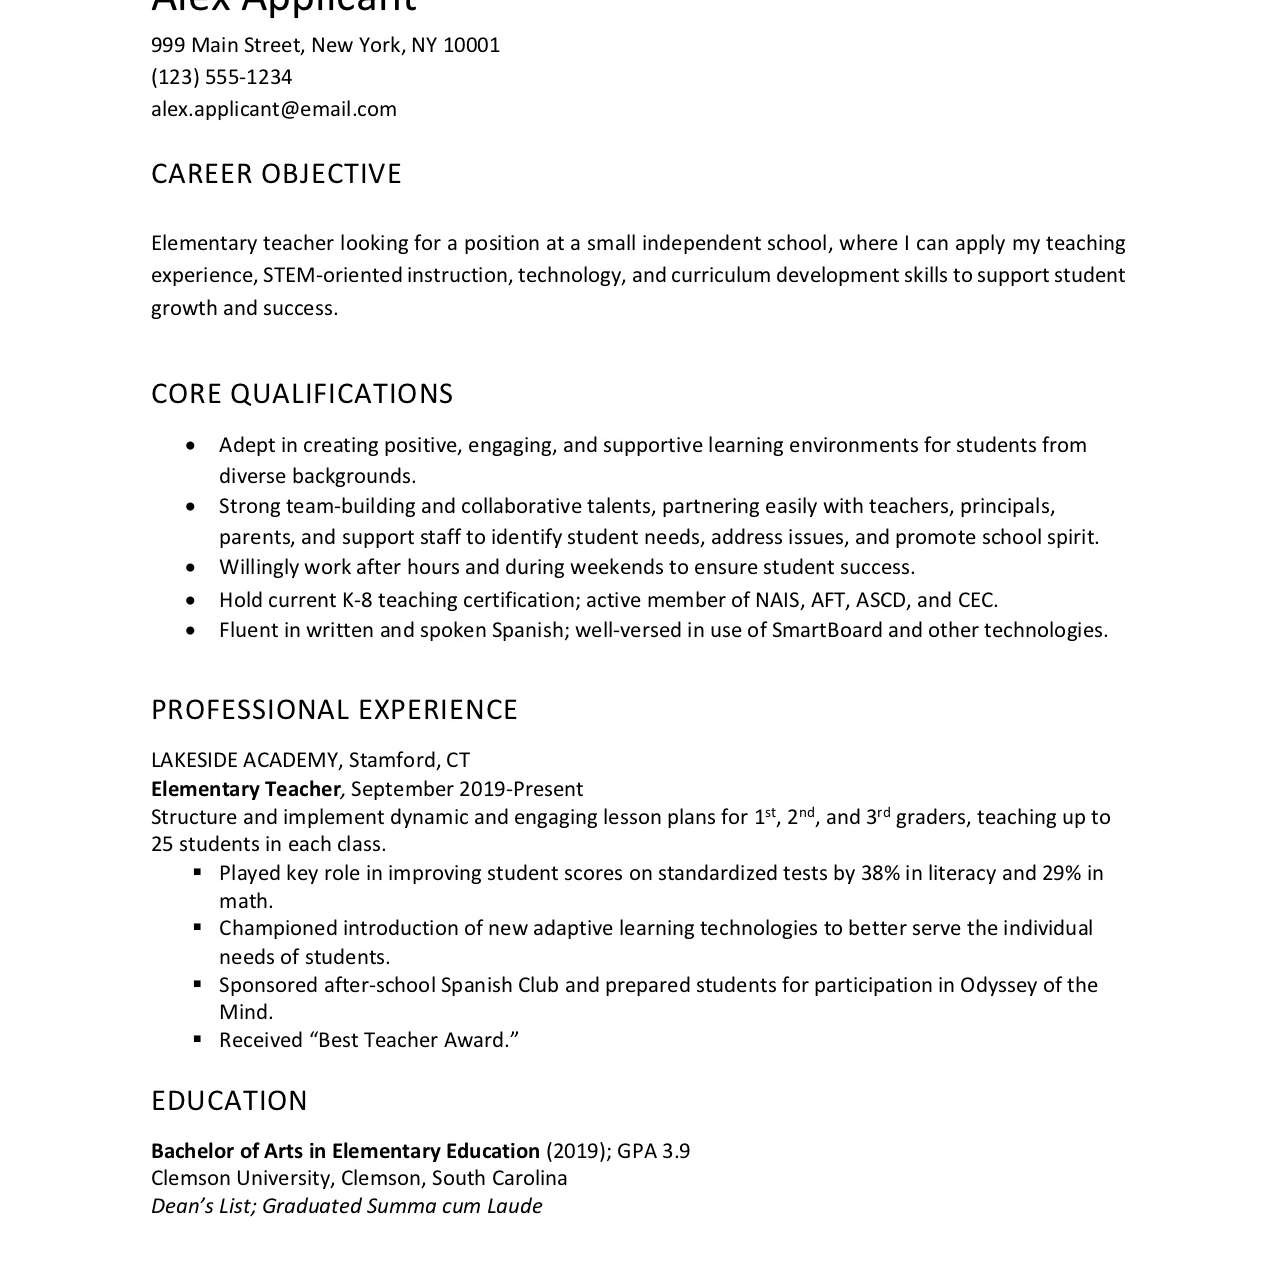 Sample Resume Objectives for On the Job Training Resume Objective Examples and Writing Tips